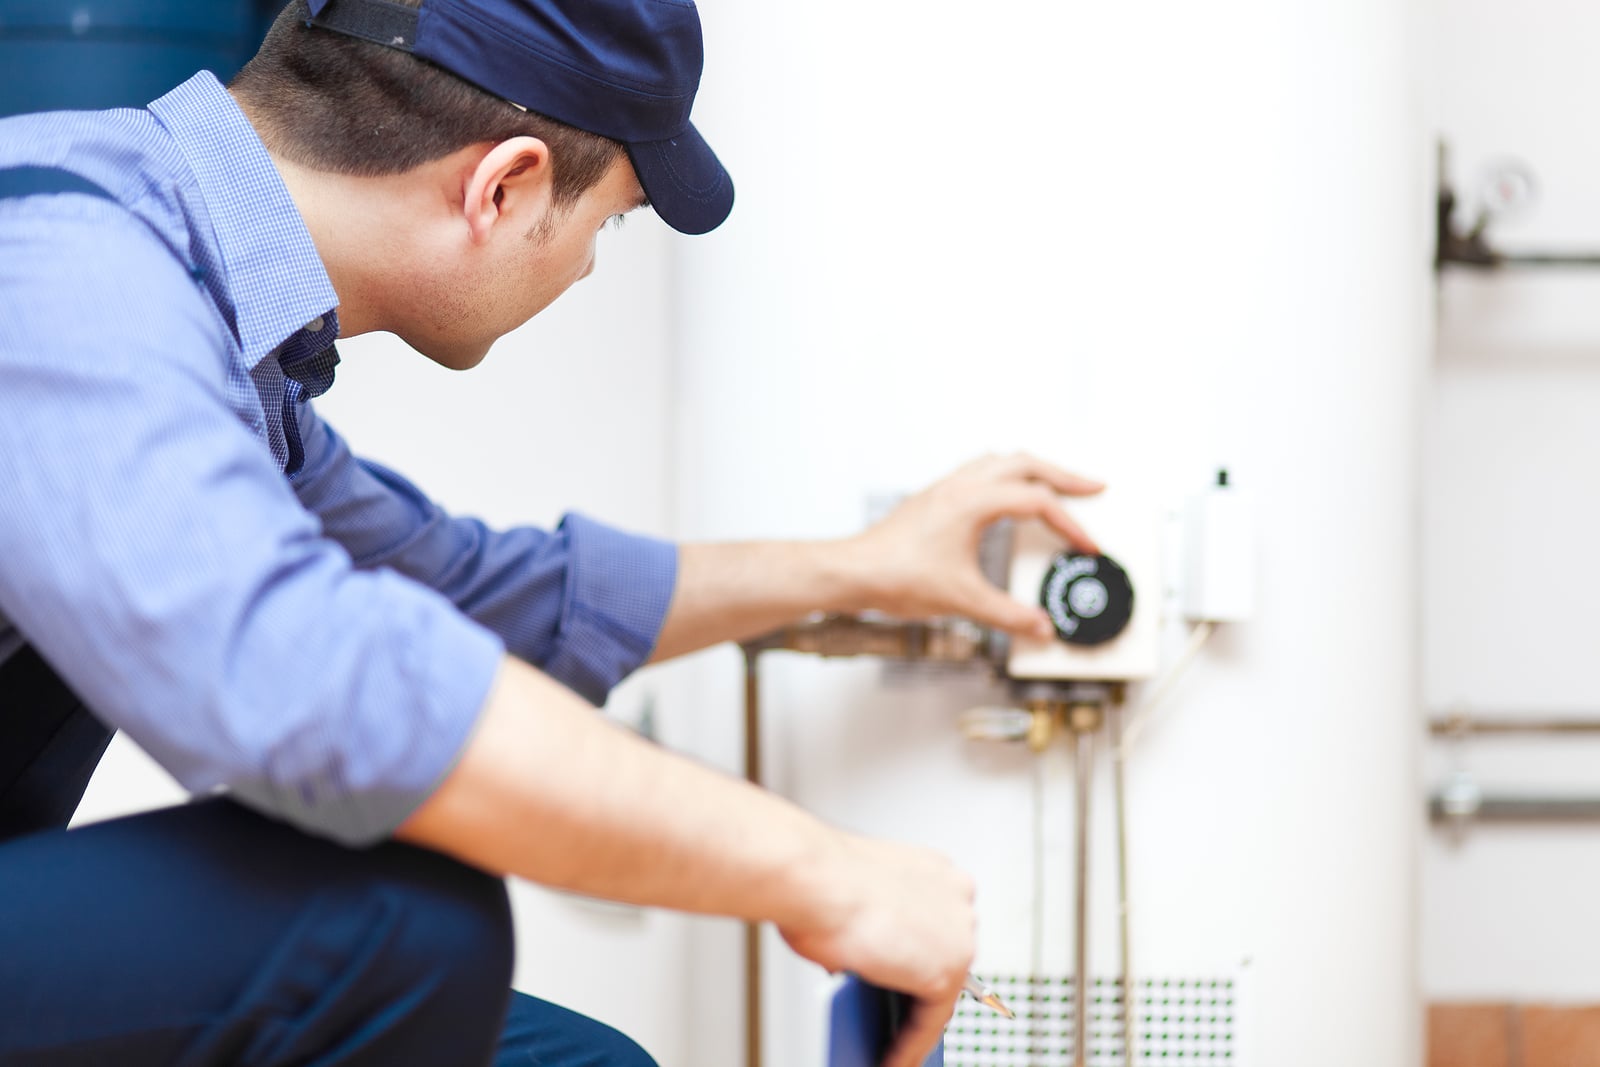 7 Things to Consider Before a Commercial Water Heater Install